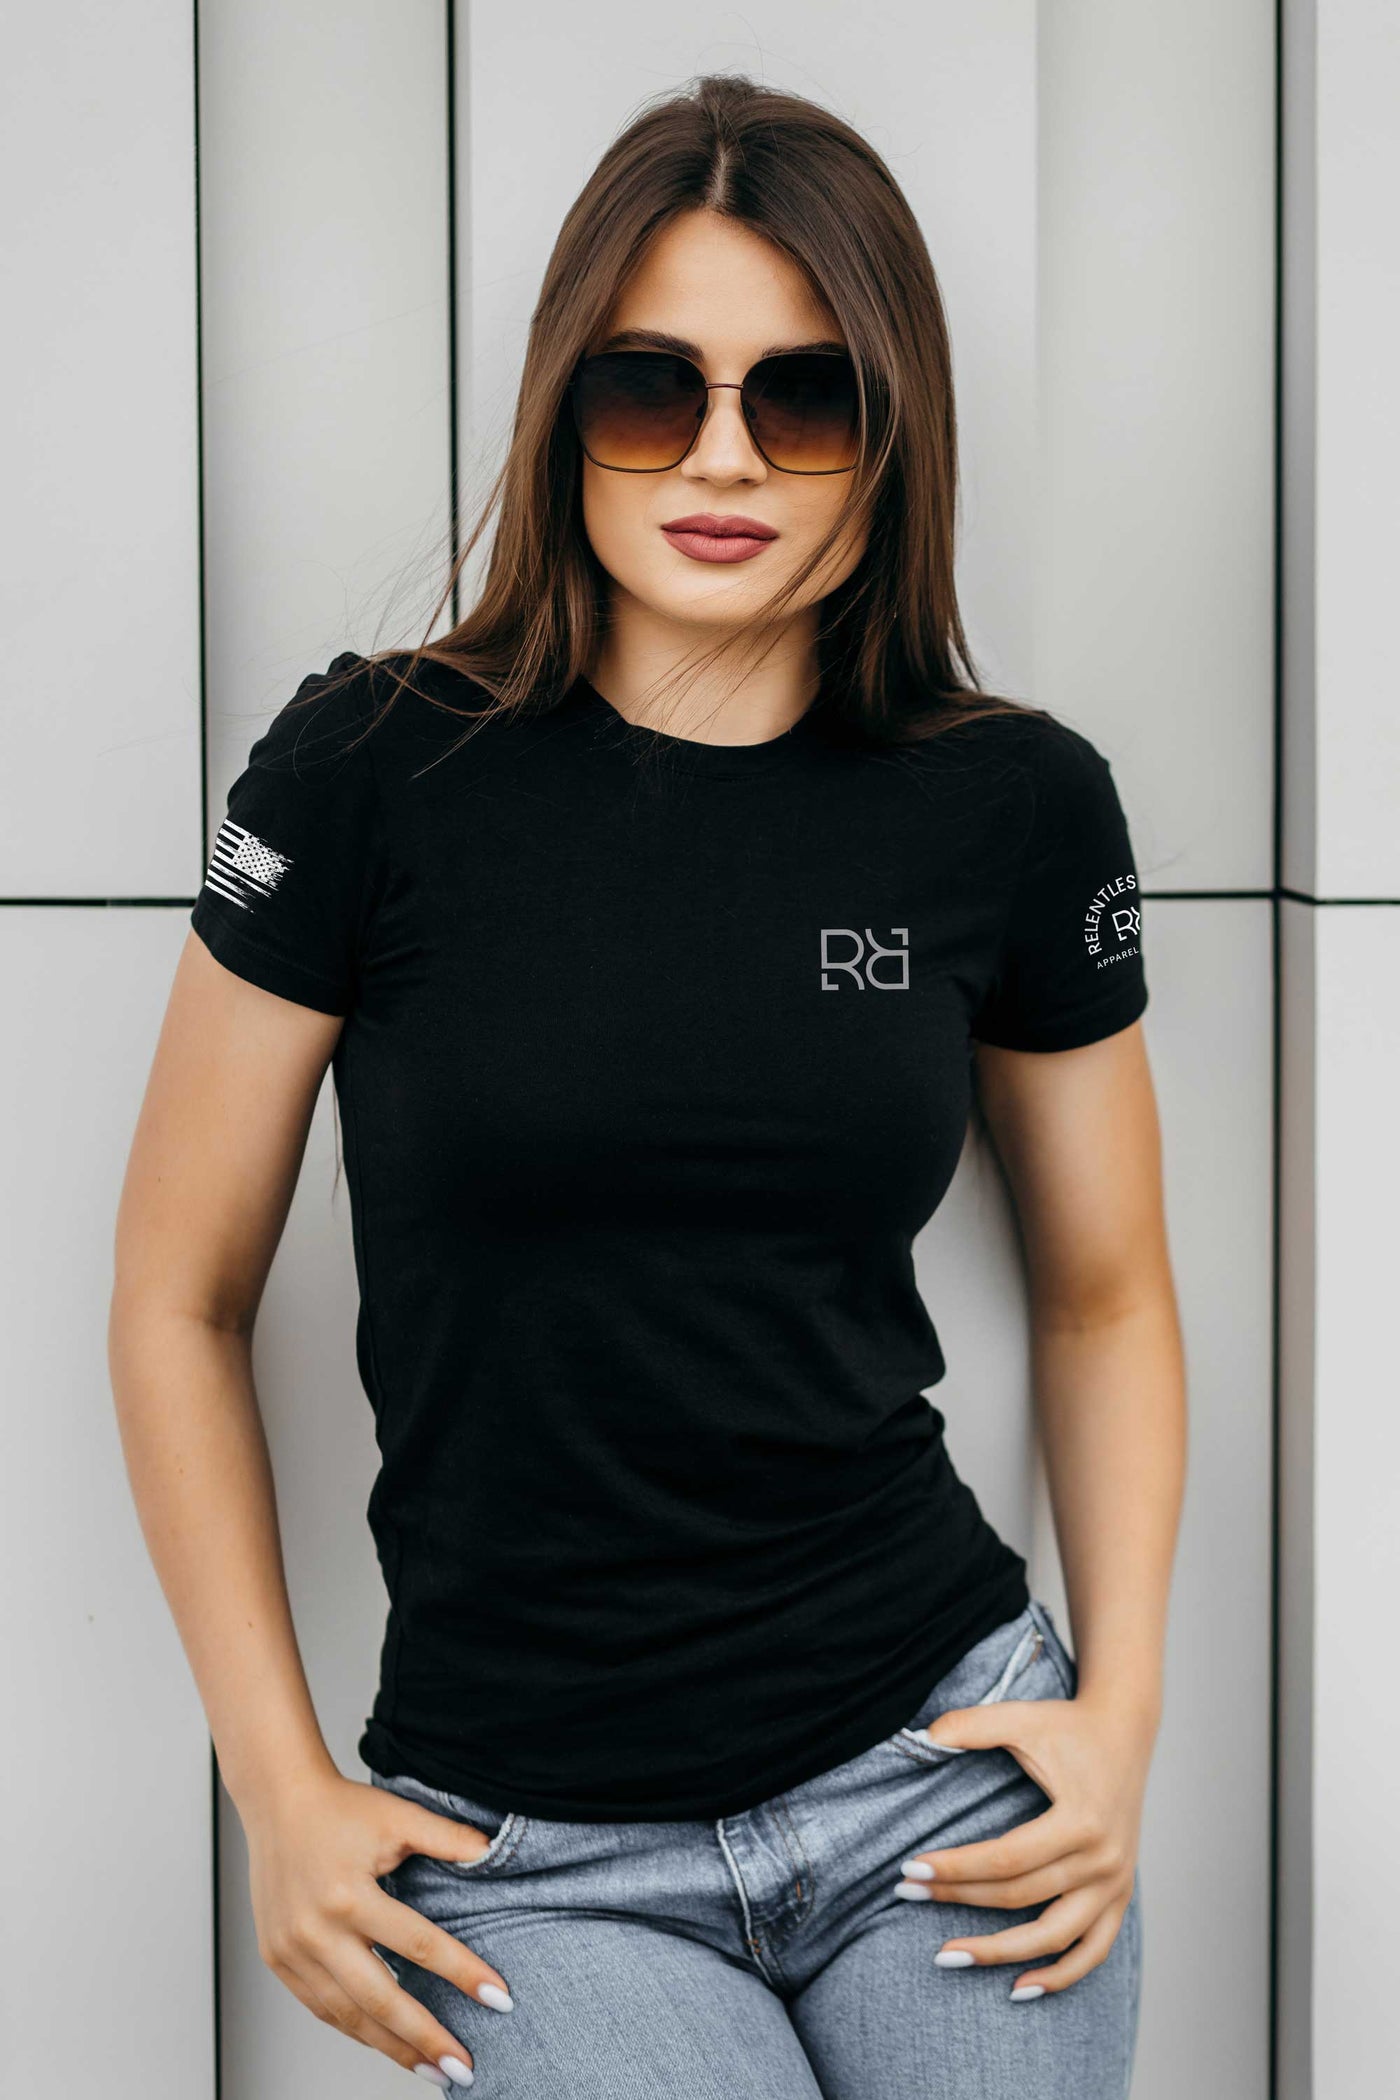 Who Lives If The Country Dies | Premium Women's Tee